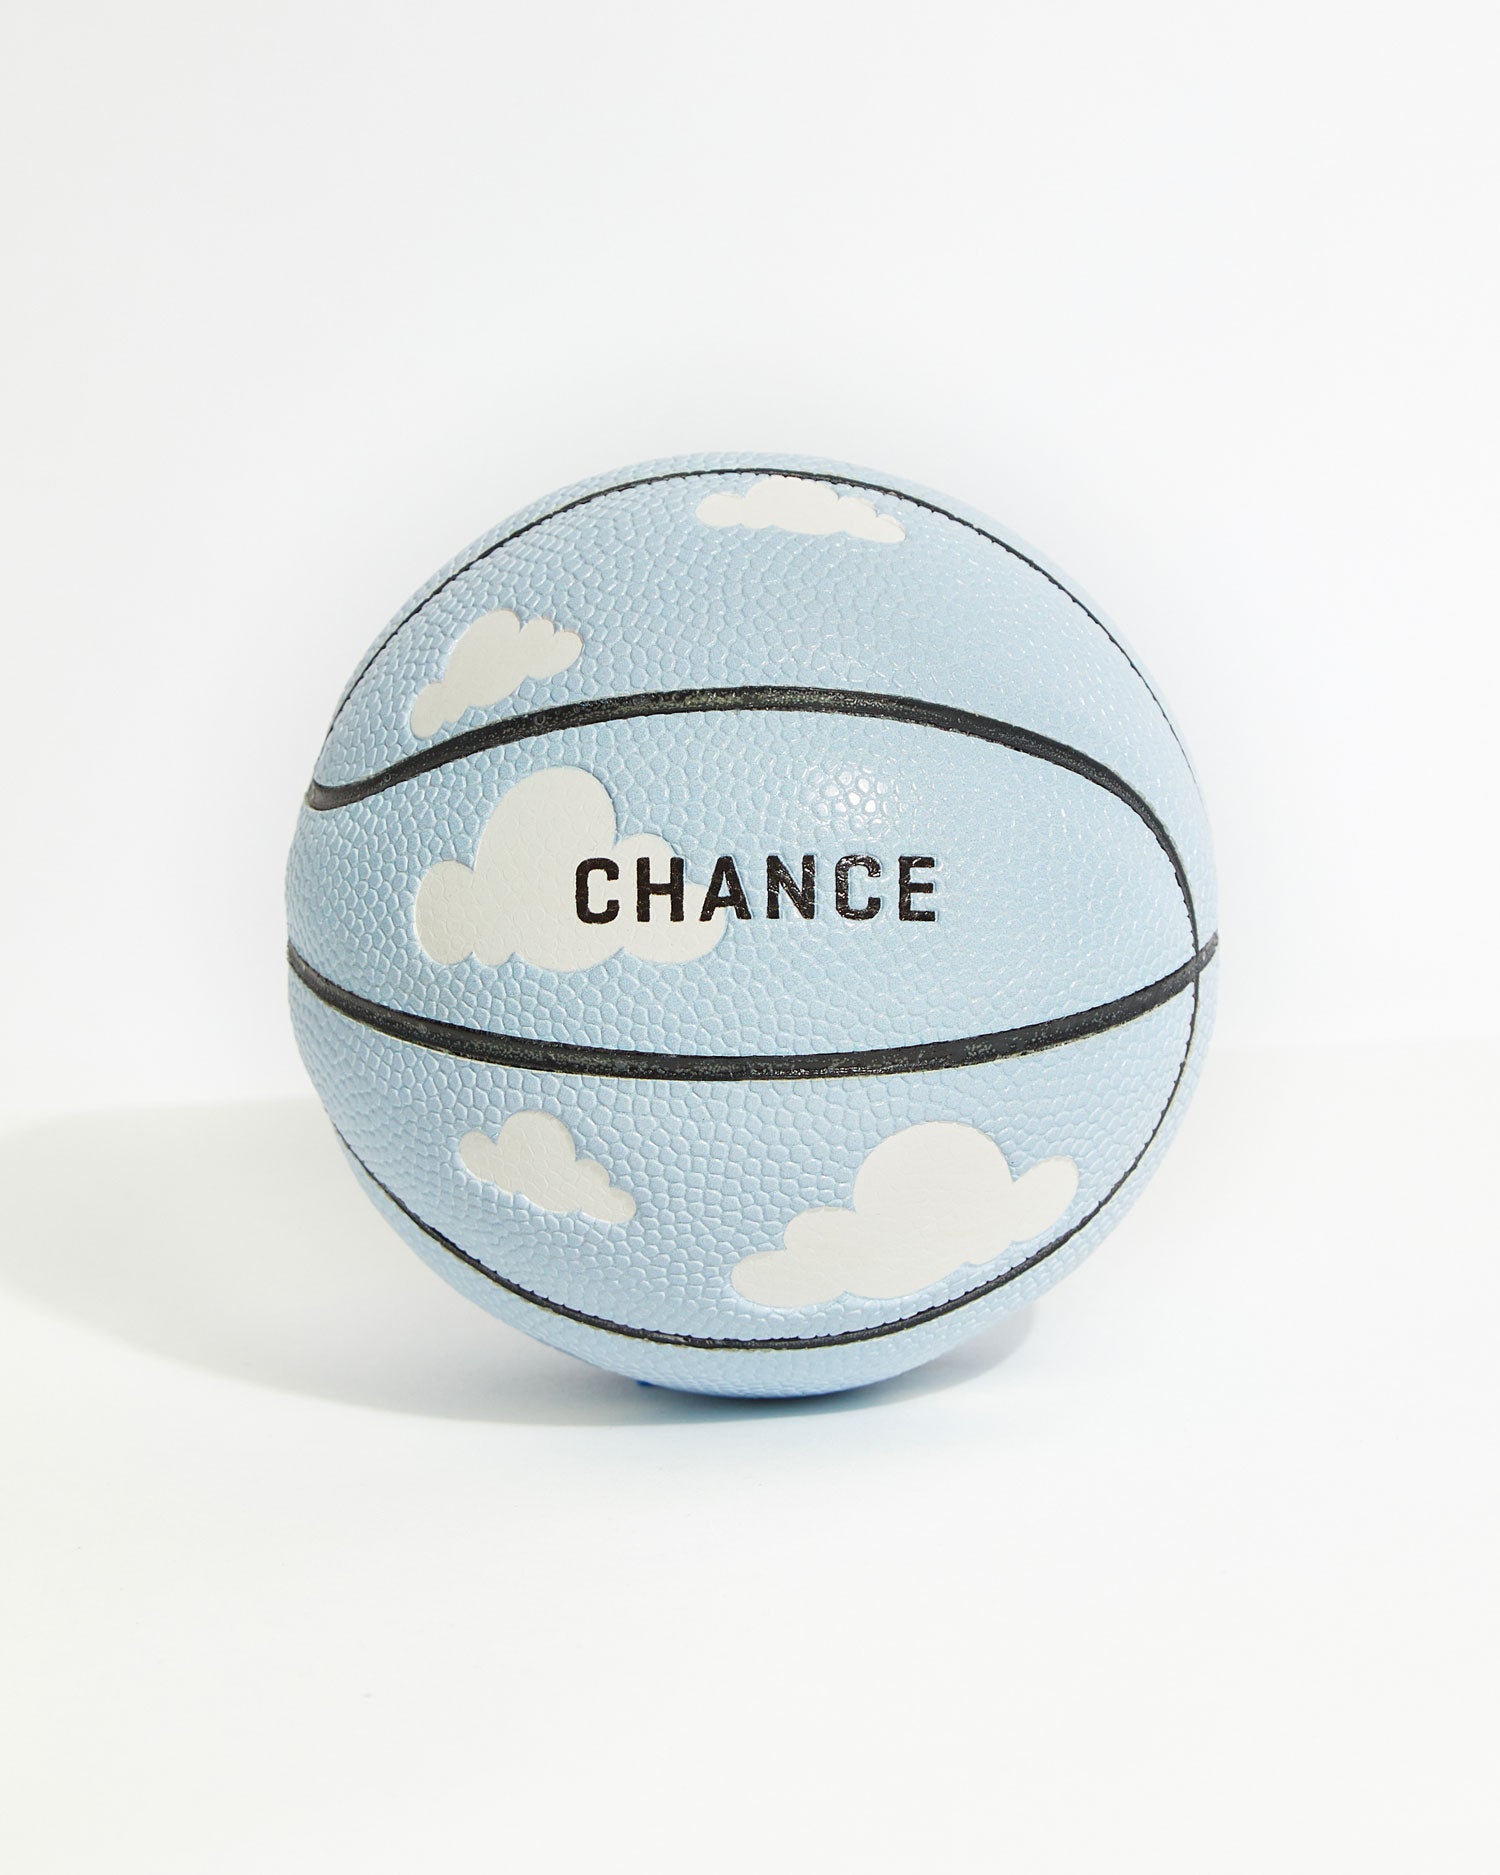 FLOAT Mini Composite Leather Basketball – Chance